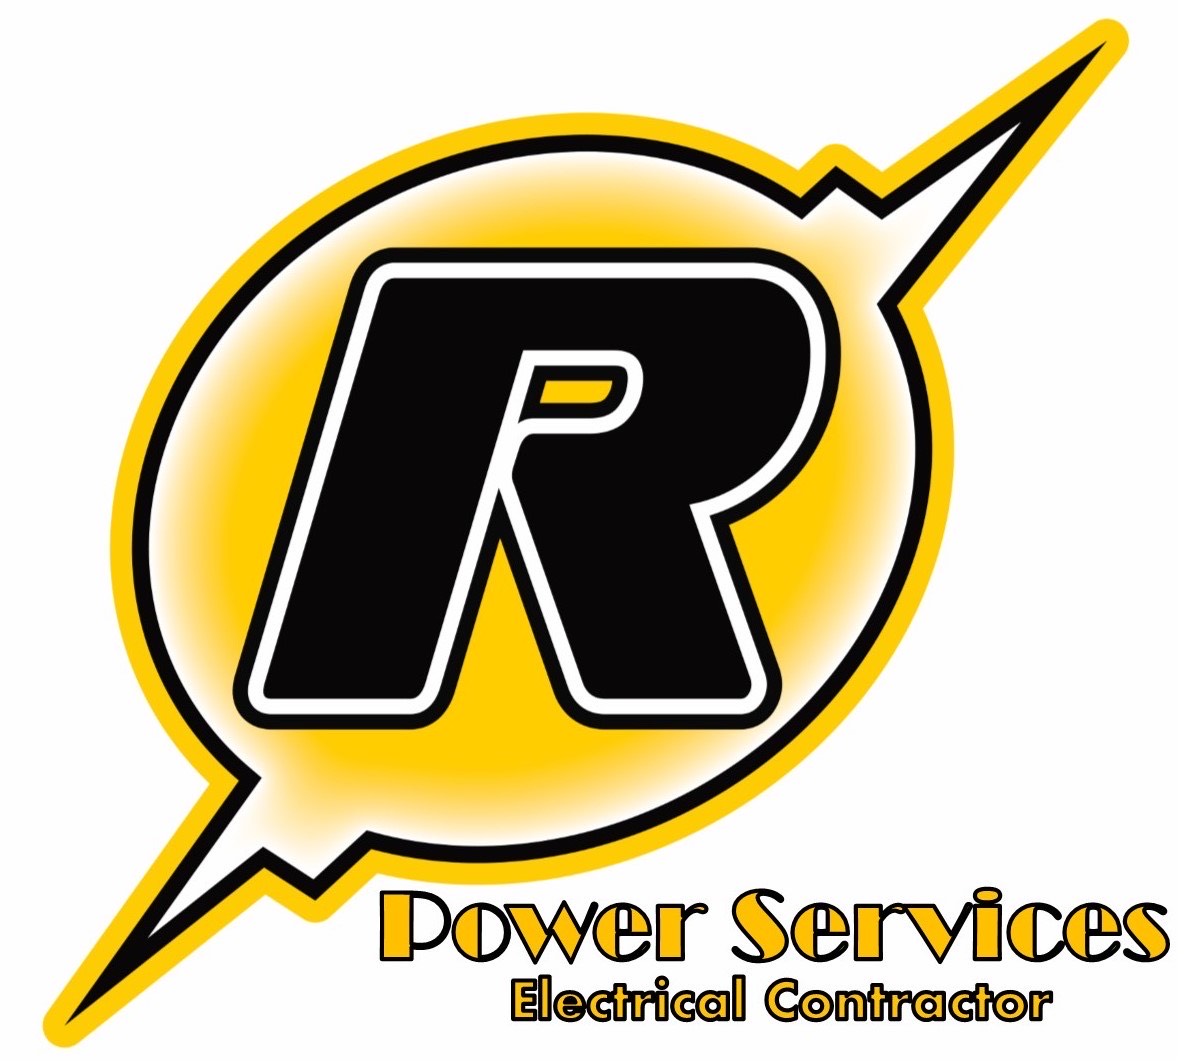 R. Power Services